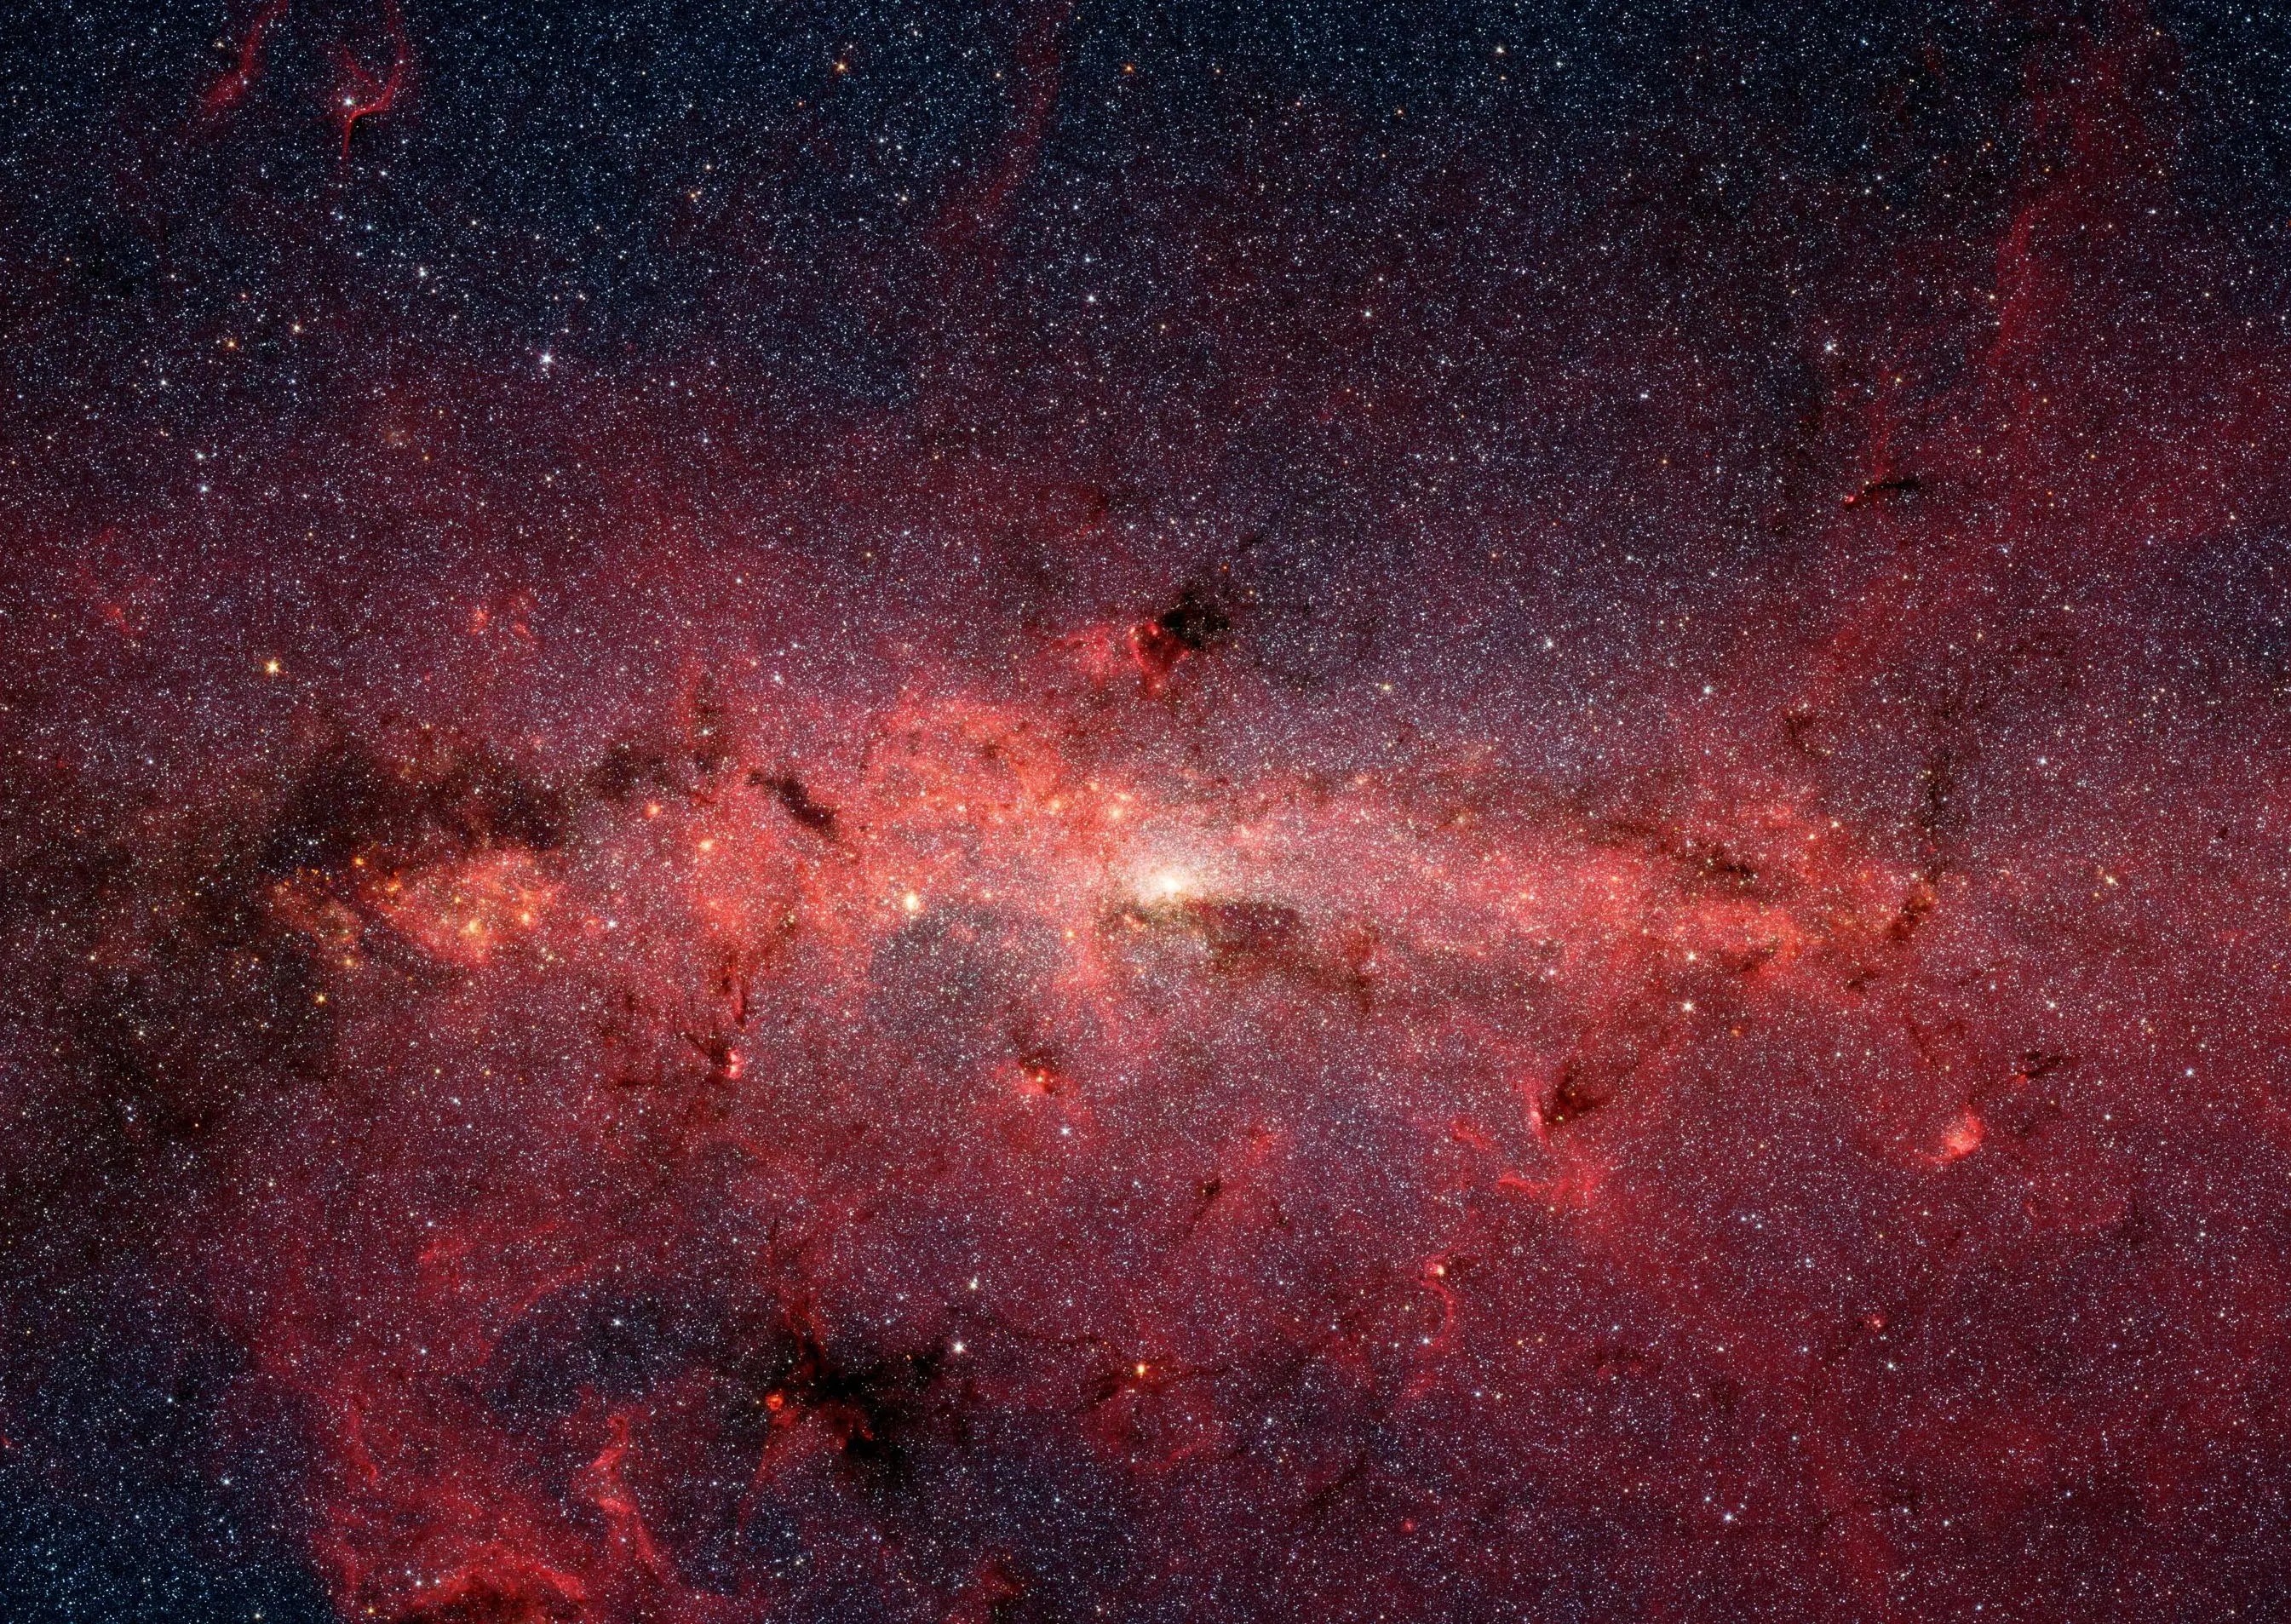 Image of the galactic center